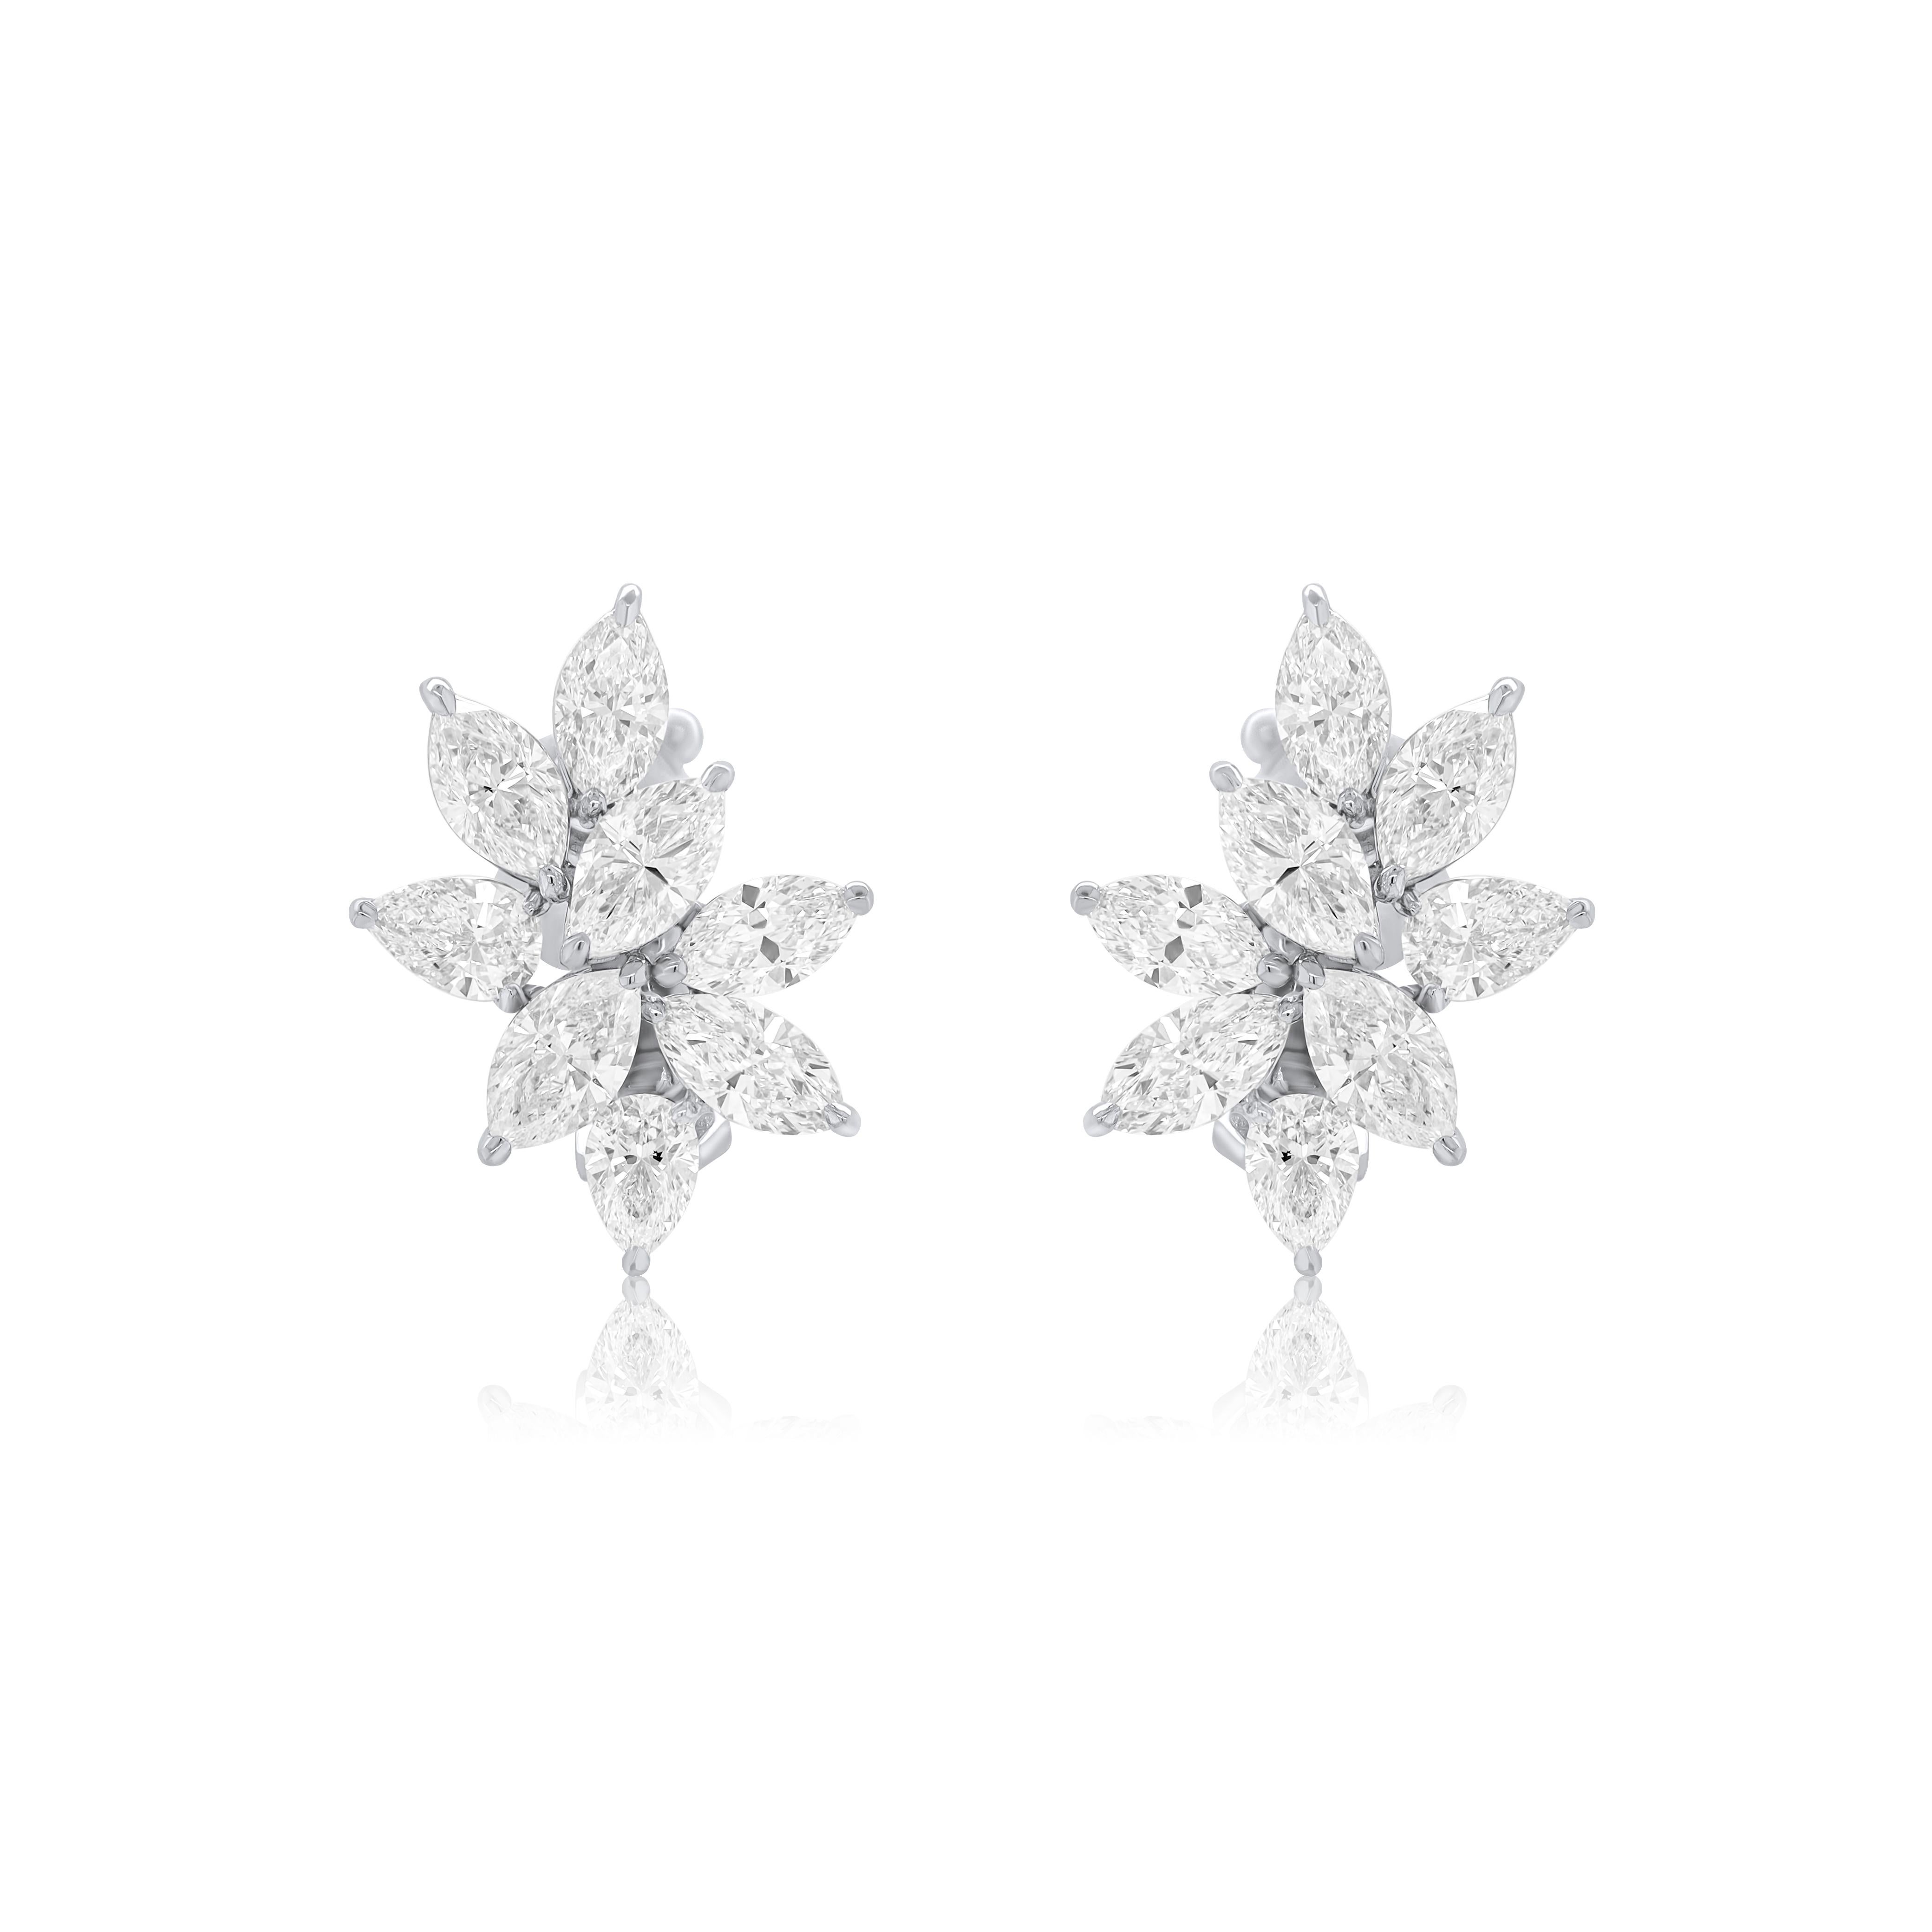 Mixed Cut Diana M. PLATINUM CLUSTER DIAMOND EARRINGS 11.20CTS OF DIAMONDS For Sale